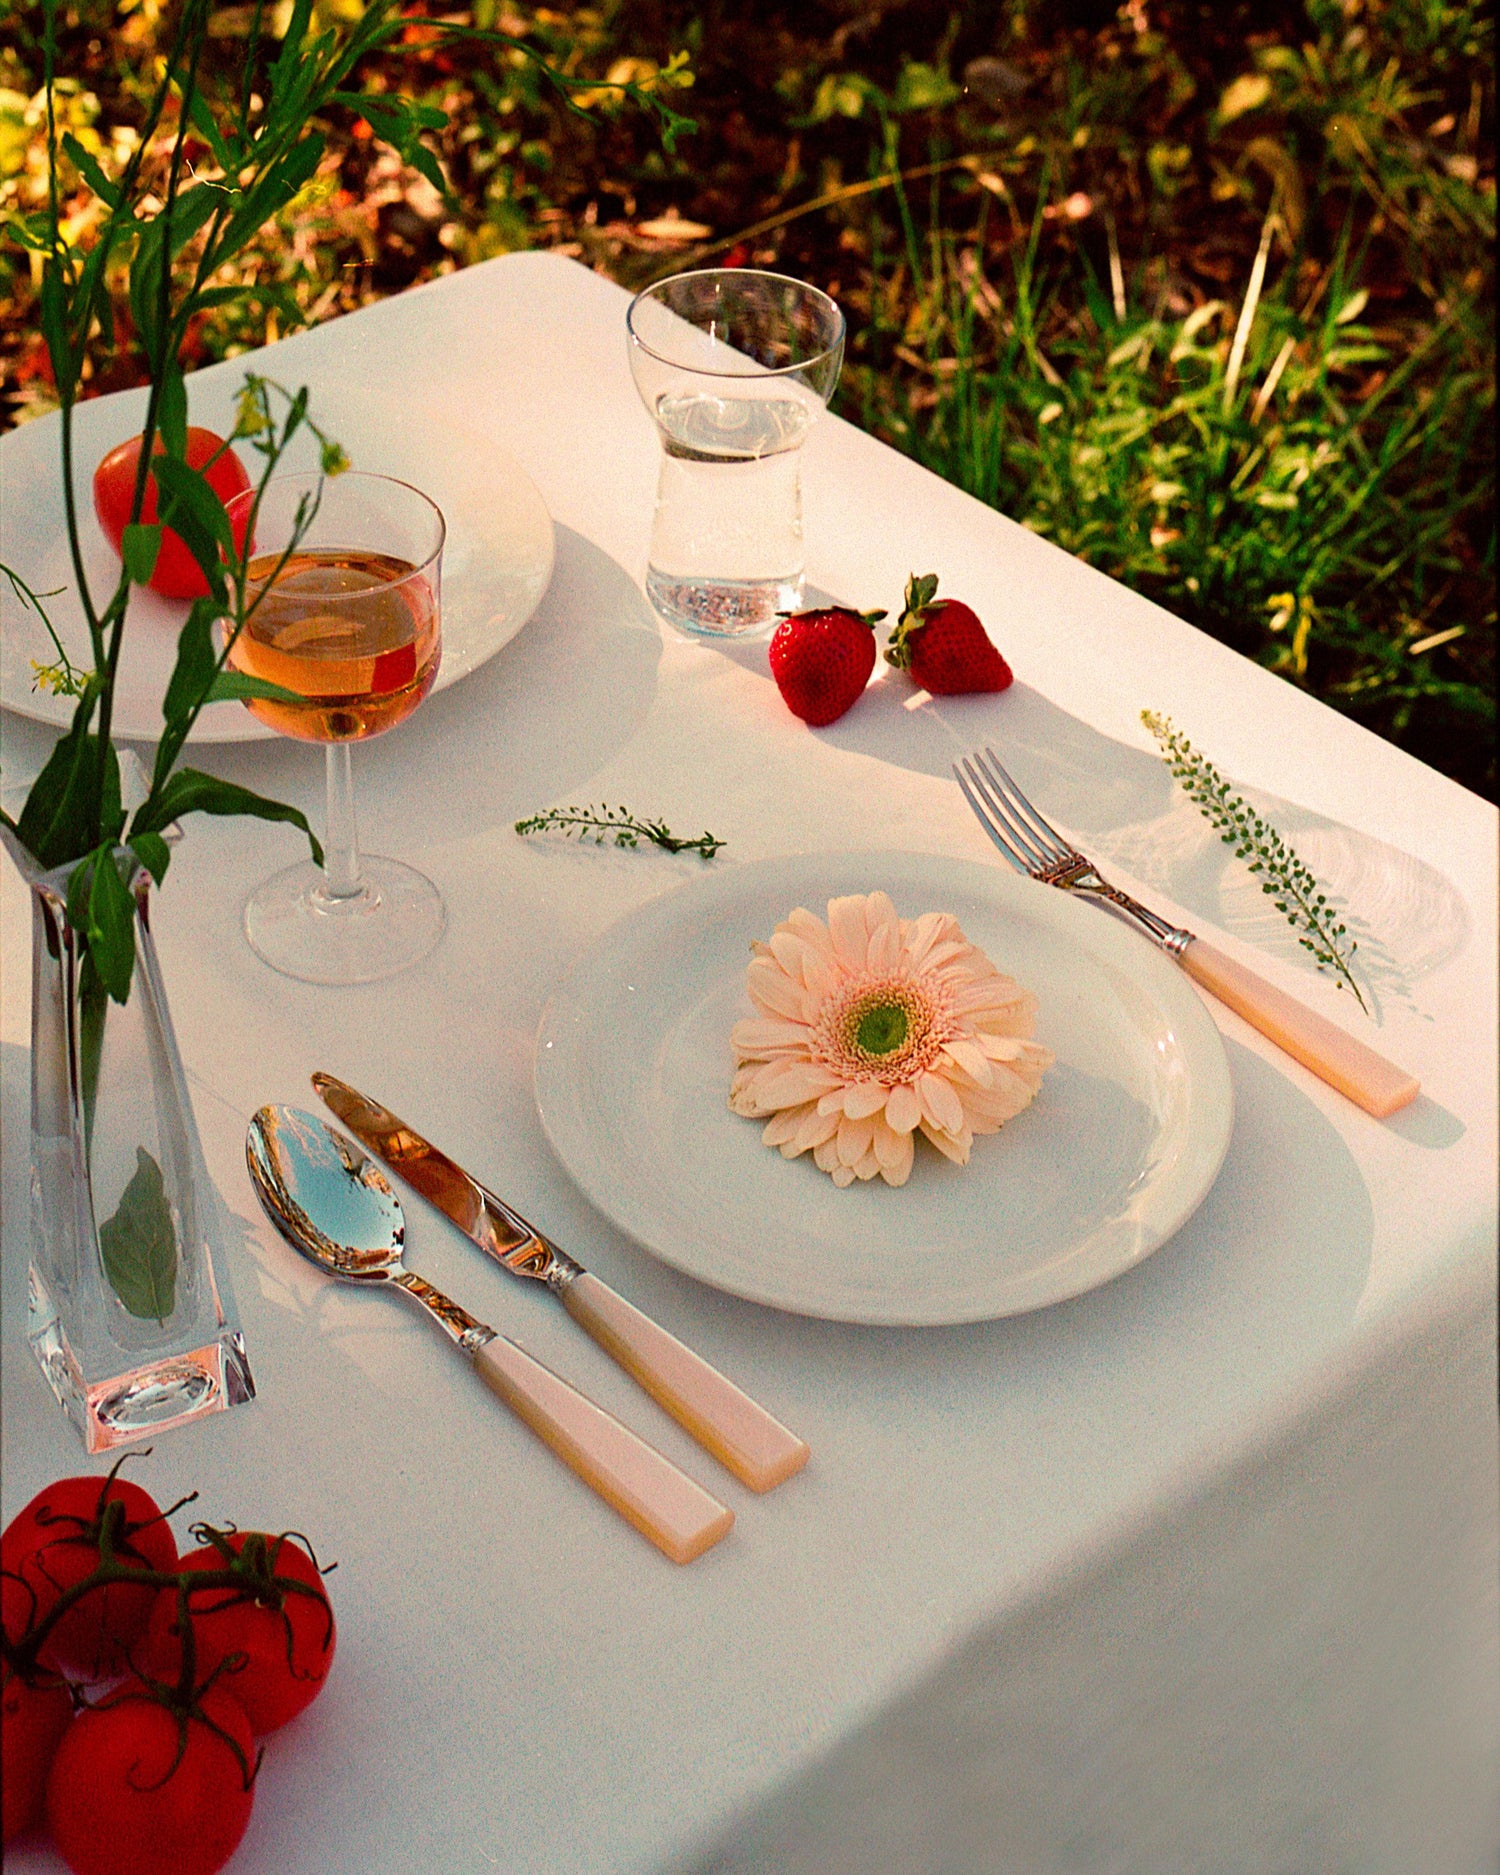 A plate with a flower and a glass of wine, part of the Pearl Cutlery Set of 5 from Party Social.